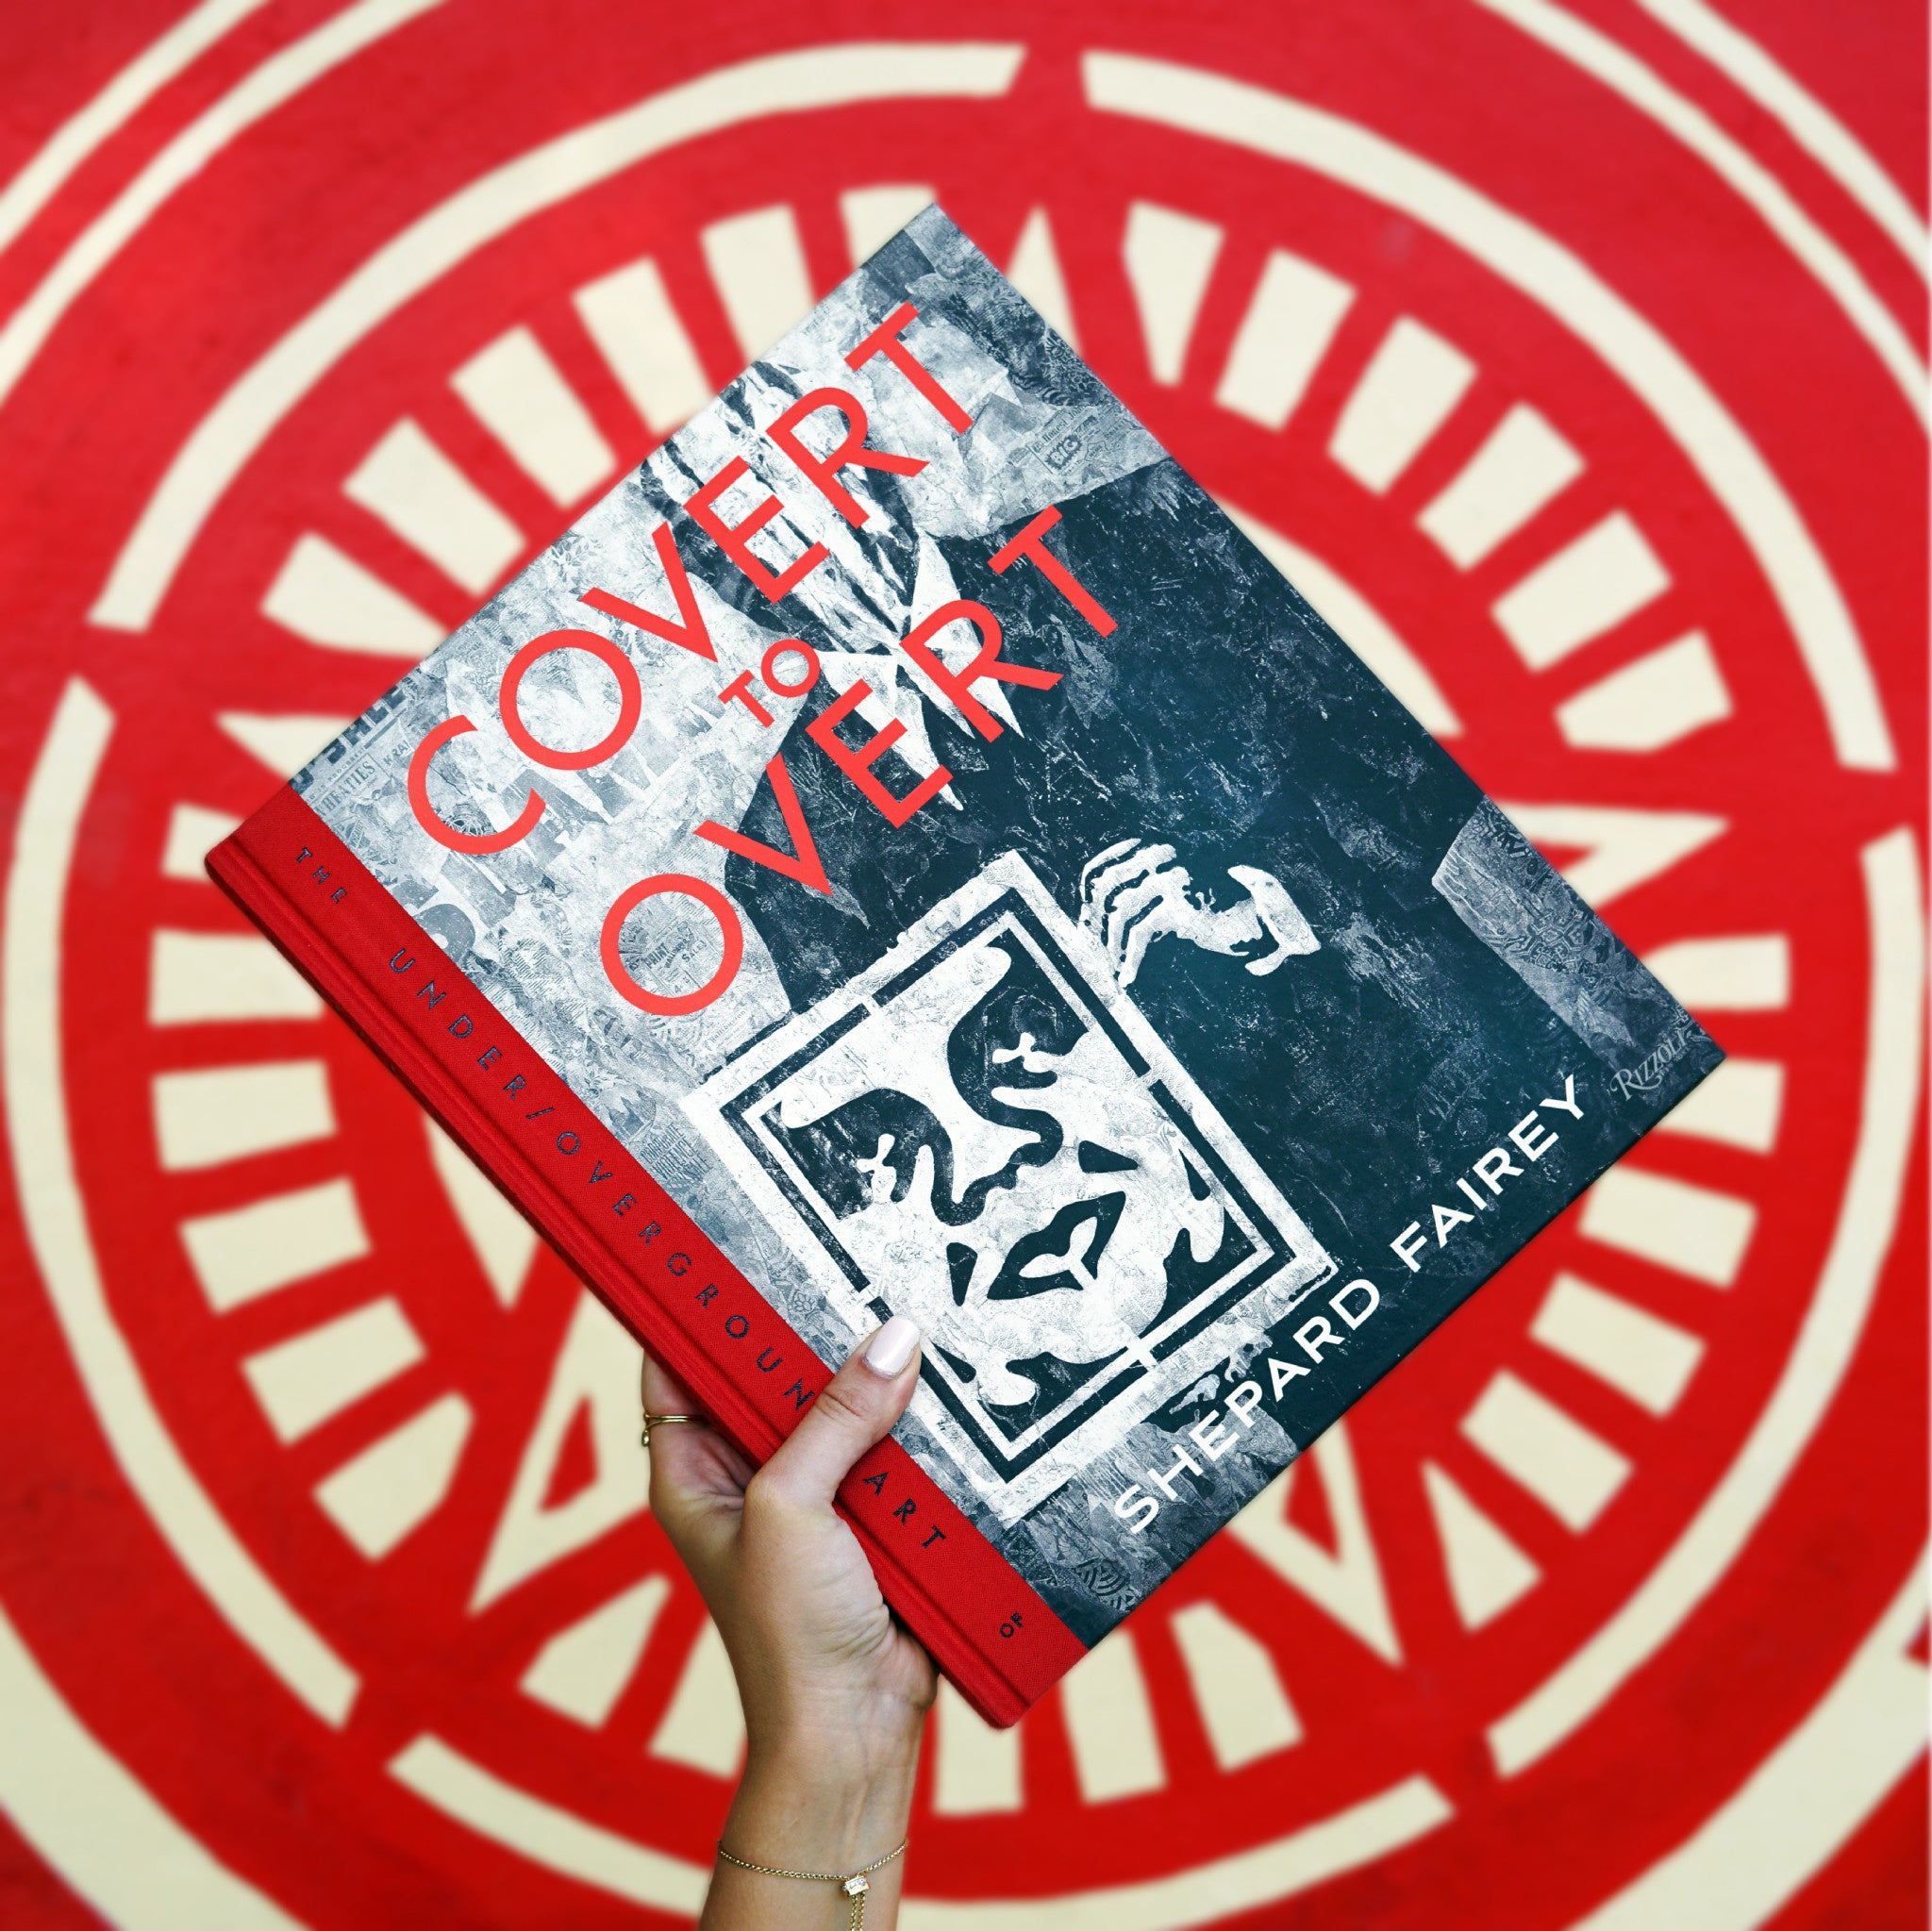 Shepard Fairey COVERT TO OVERT Signed Book - Wynwood Walls Shop